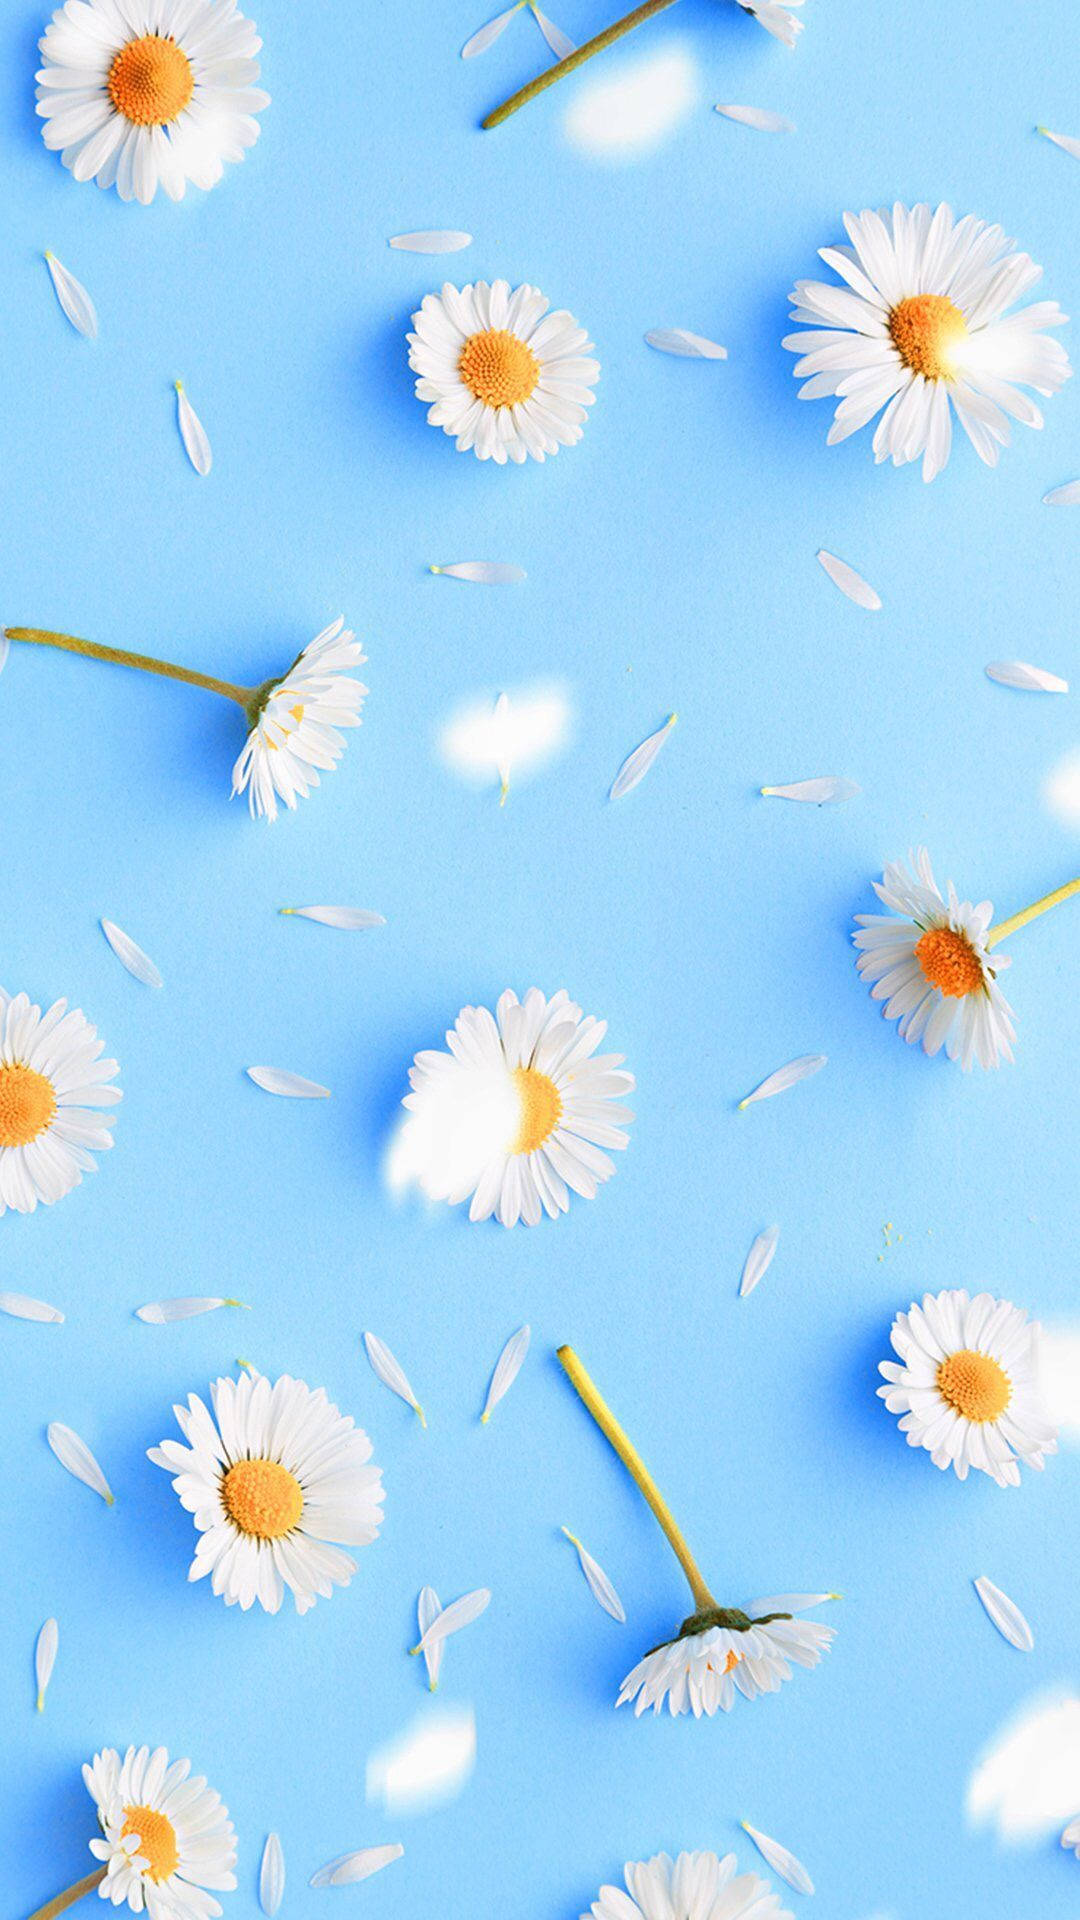 Daisy Iphone On Pastel Blue Surface Wallpaper